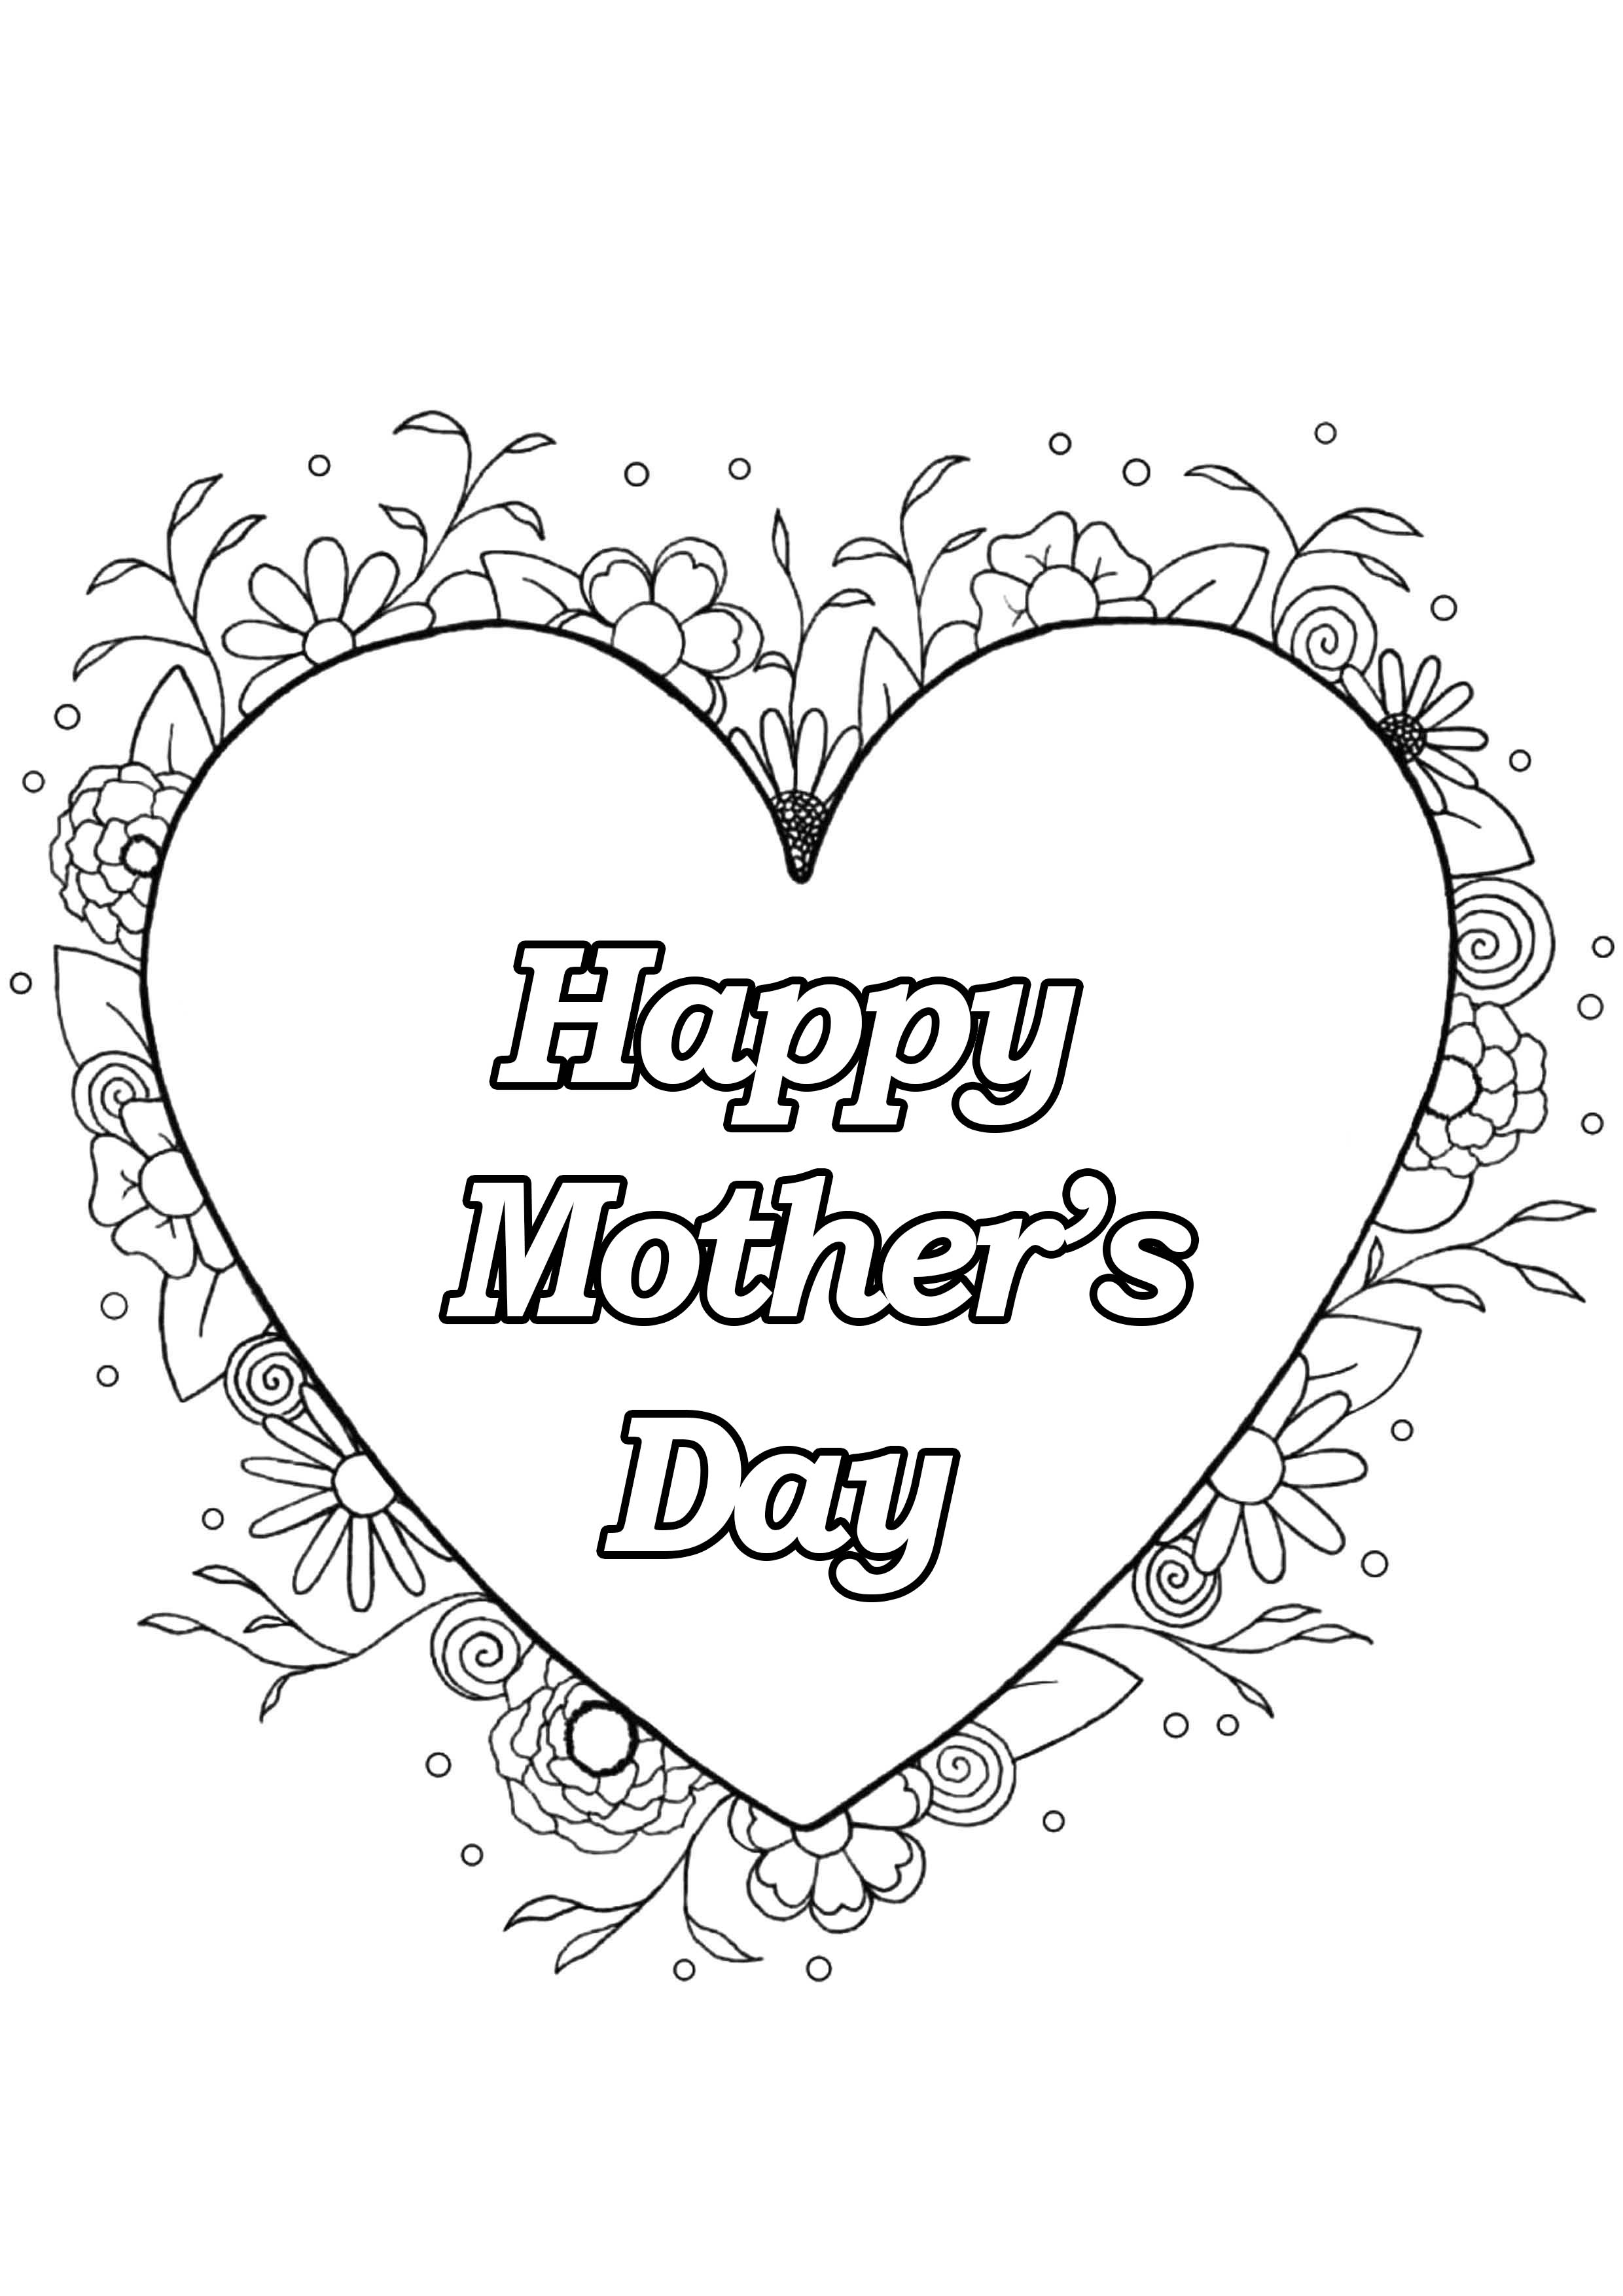 Download Mother s day 4 - Mother's Day Adult Coloring Pages